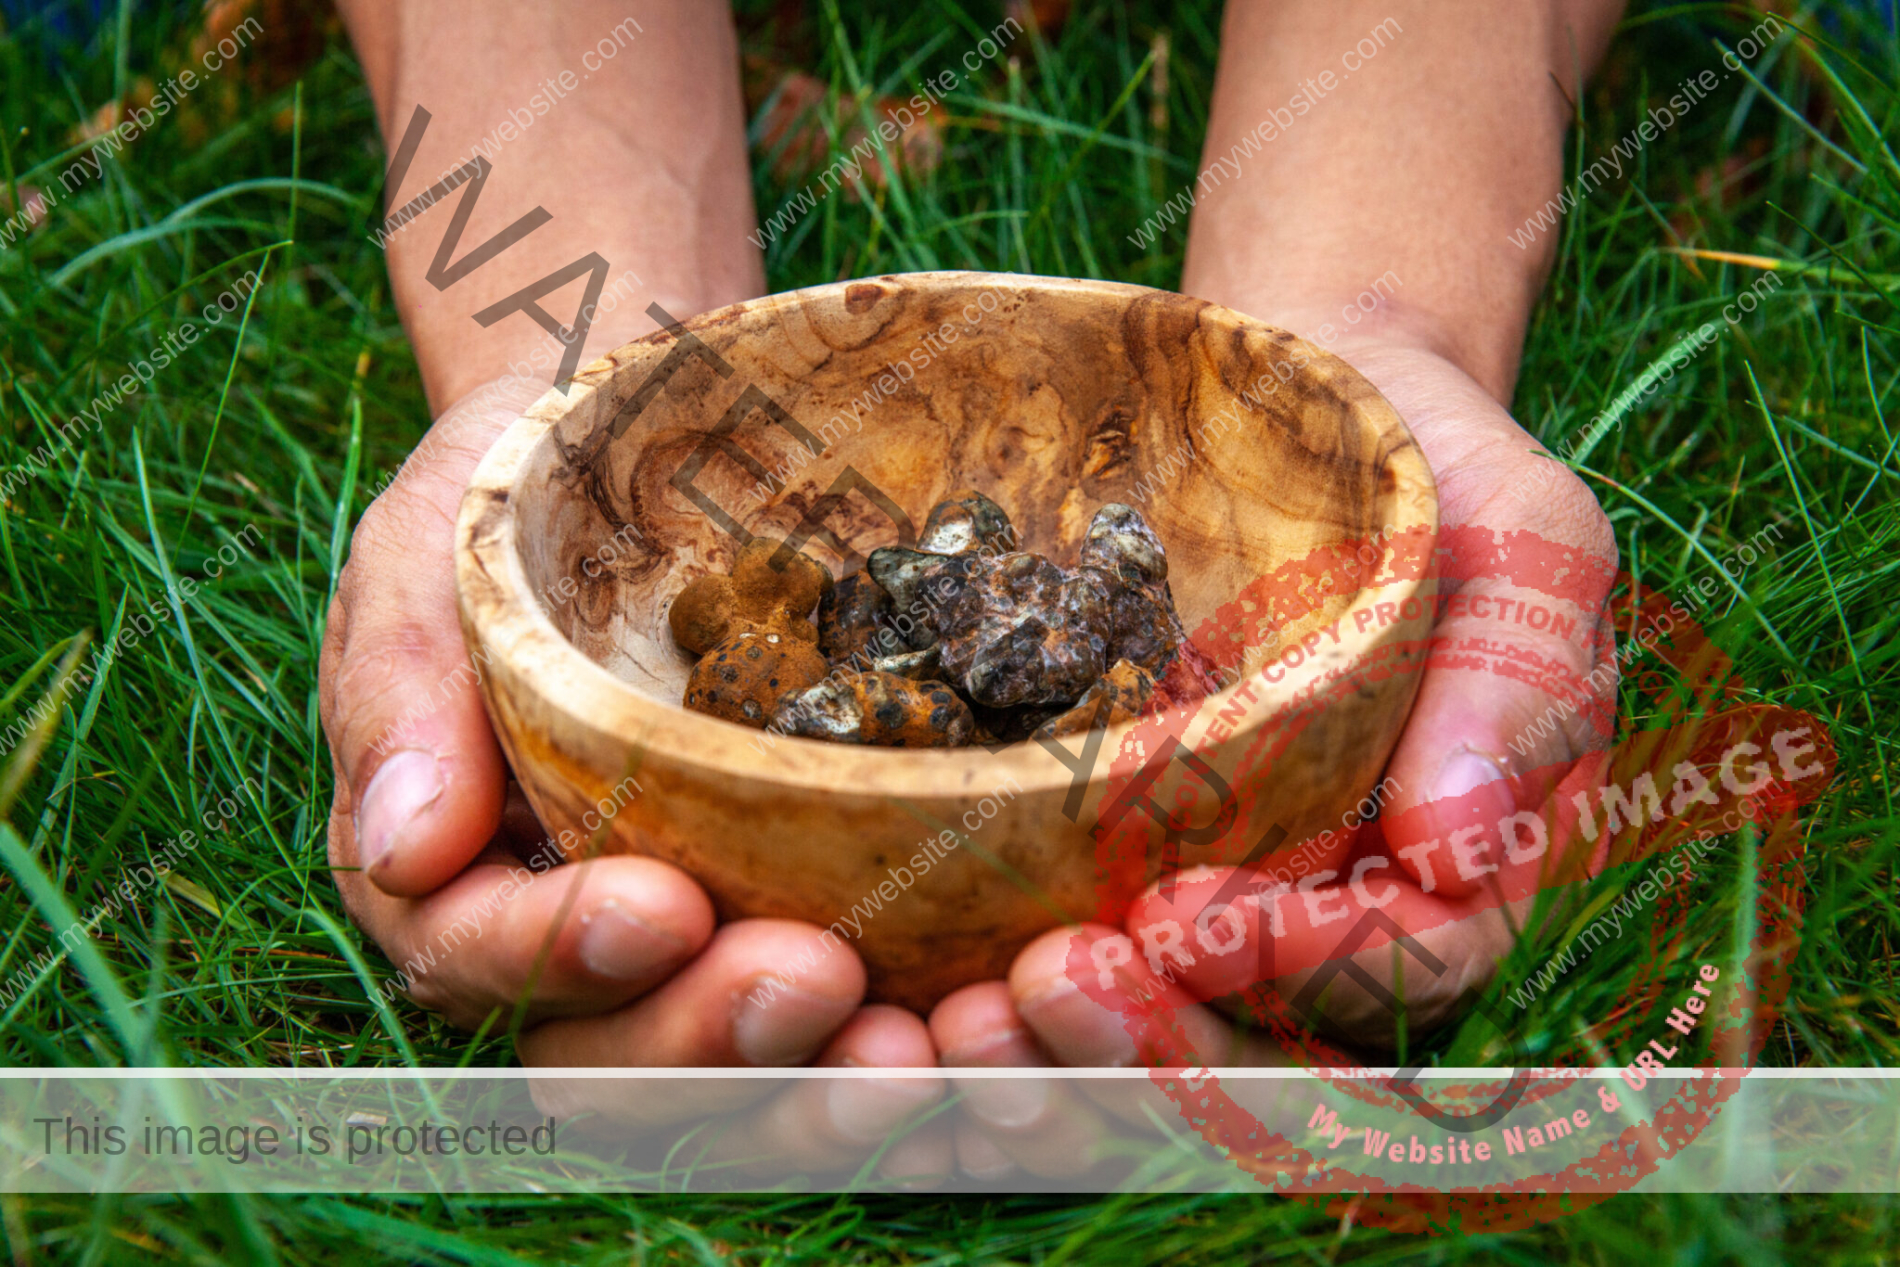 Magic Truffles in a wooden bowl and placed in two hands on green gras